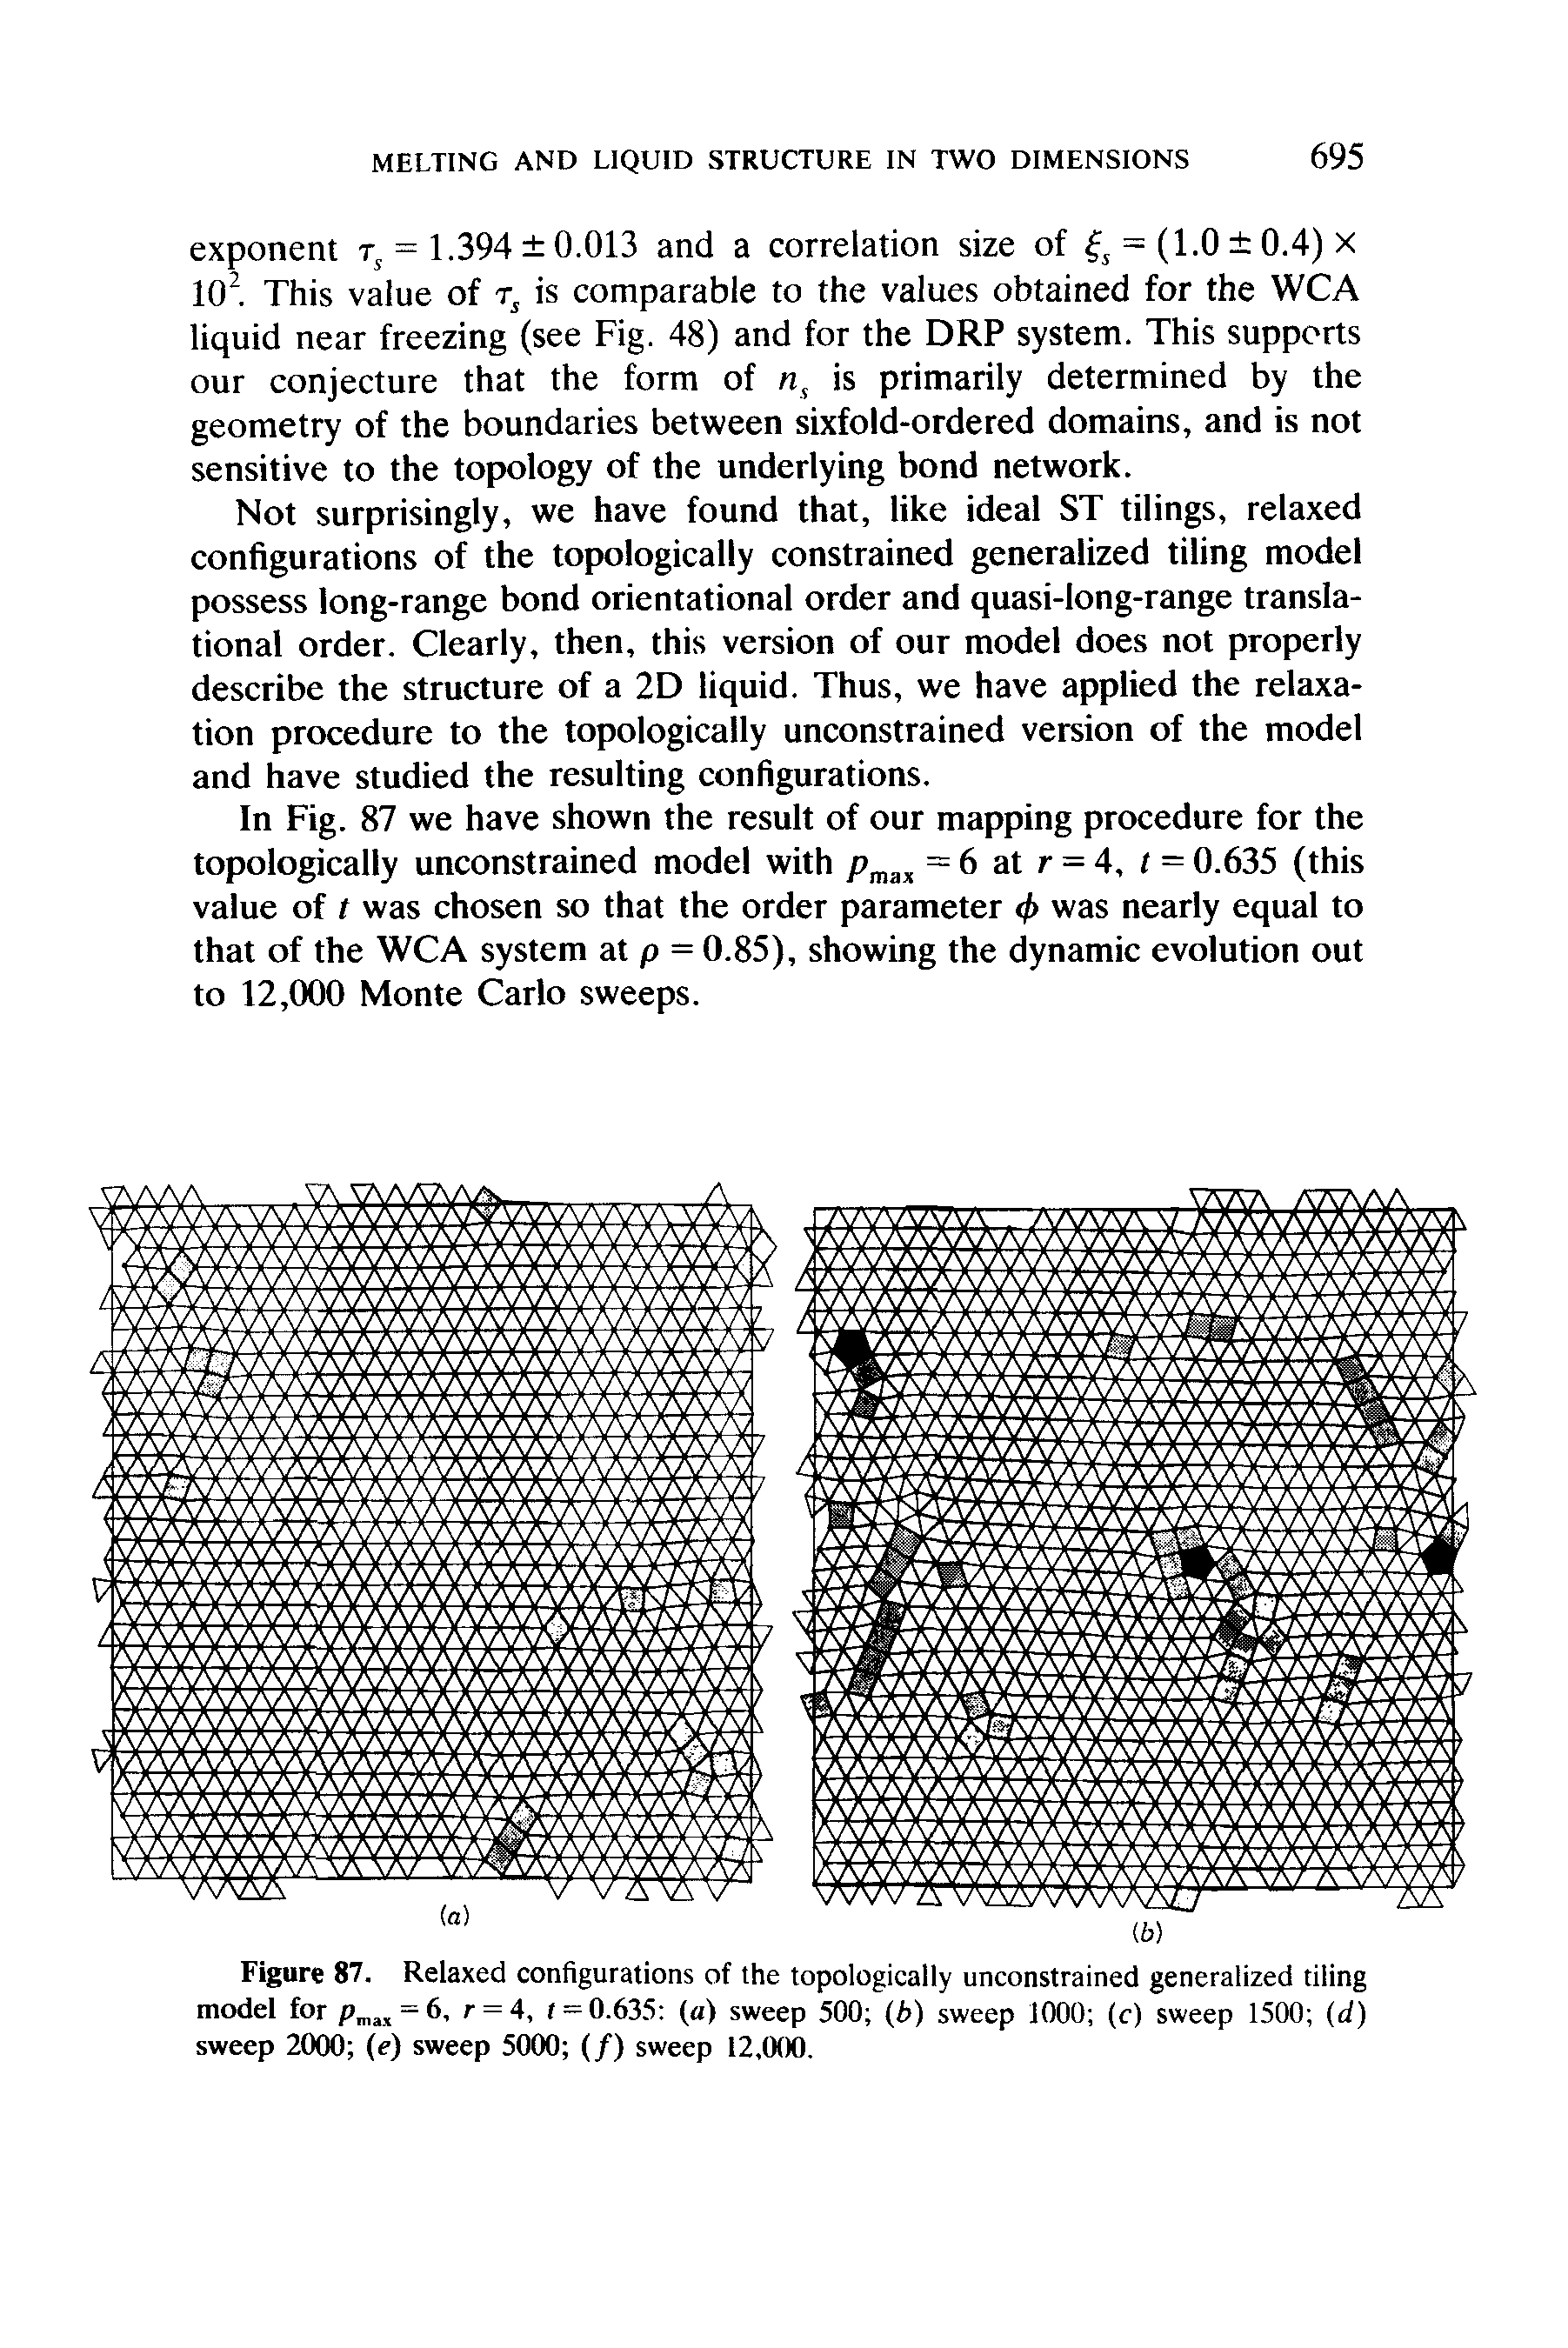 Figure 87. Relaxed configurations of the topologically unconstrained generalized tiling model for = r = 4, r = 0.635 (a) sweep 500 (b) sweep 1000 (c) sweep 1500 (d) sweep 2000 (e) sweep 5000 (/) sweep 12,000.